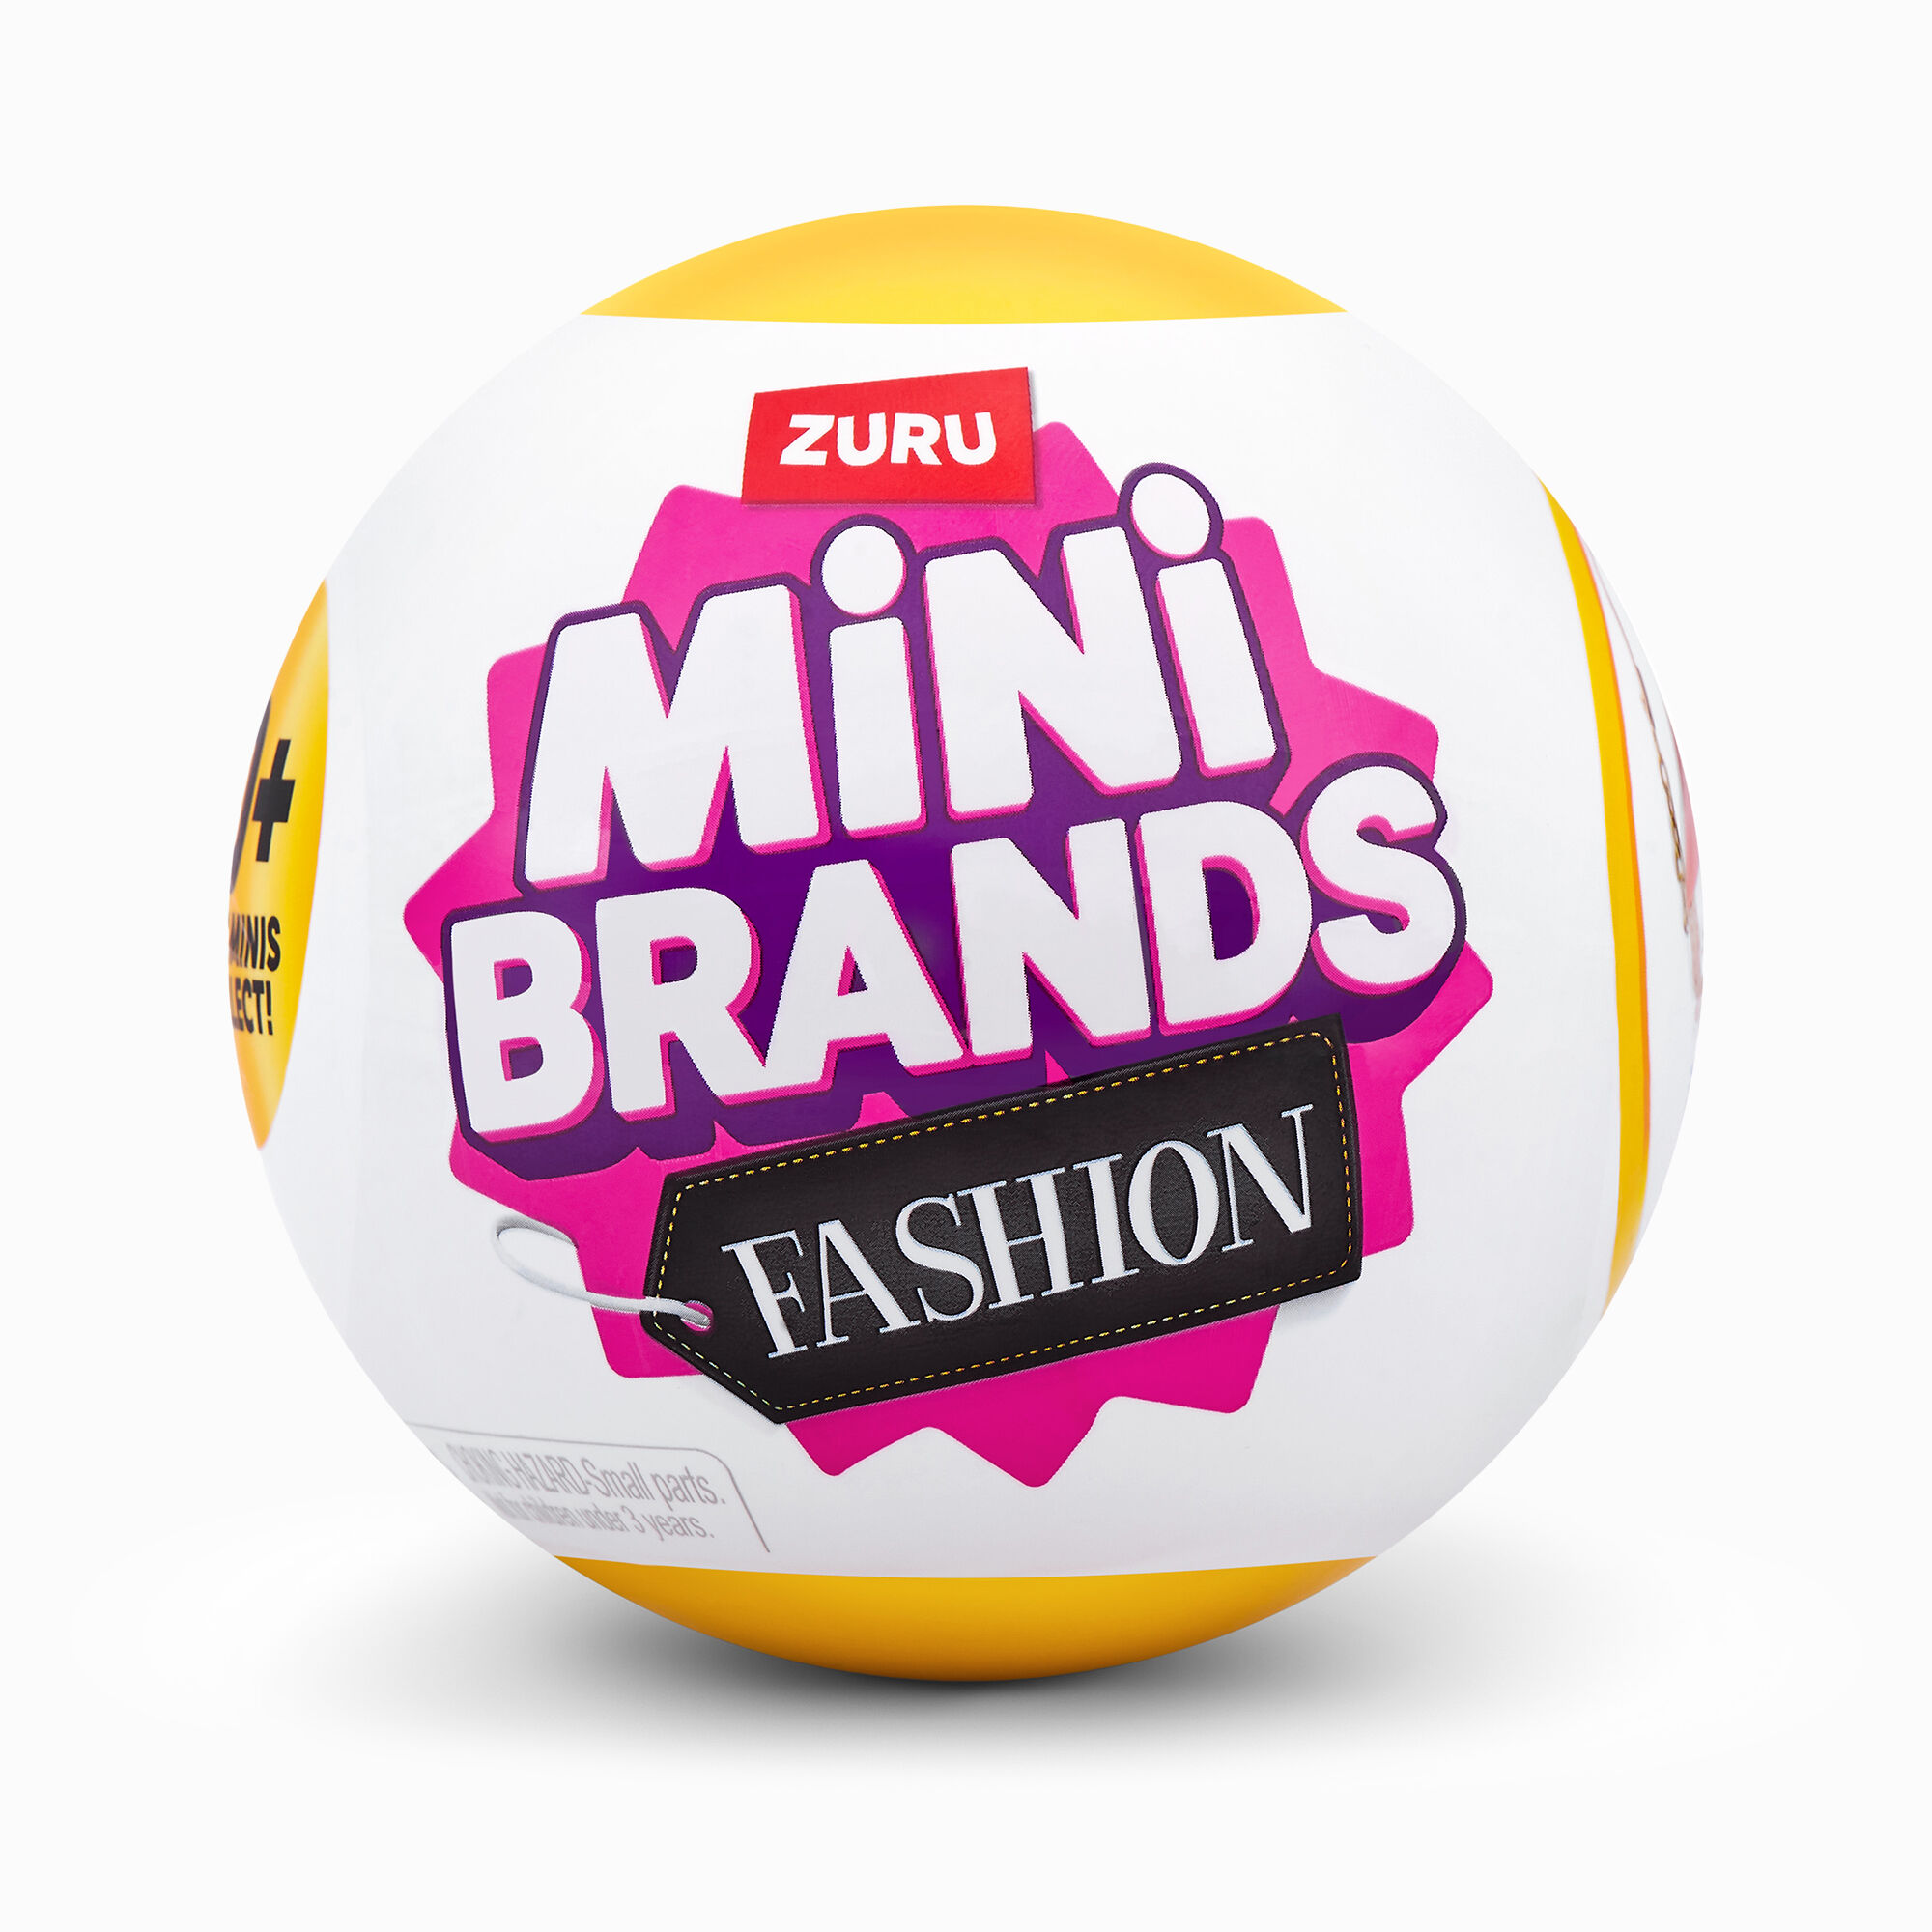 View Claires Zuru 5 Surprise Fashion Series 3 Mini Brands Blind Bag Styles Vary Gold information